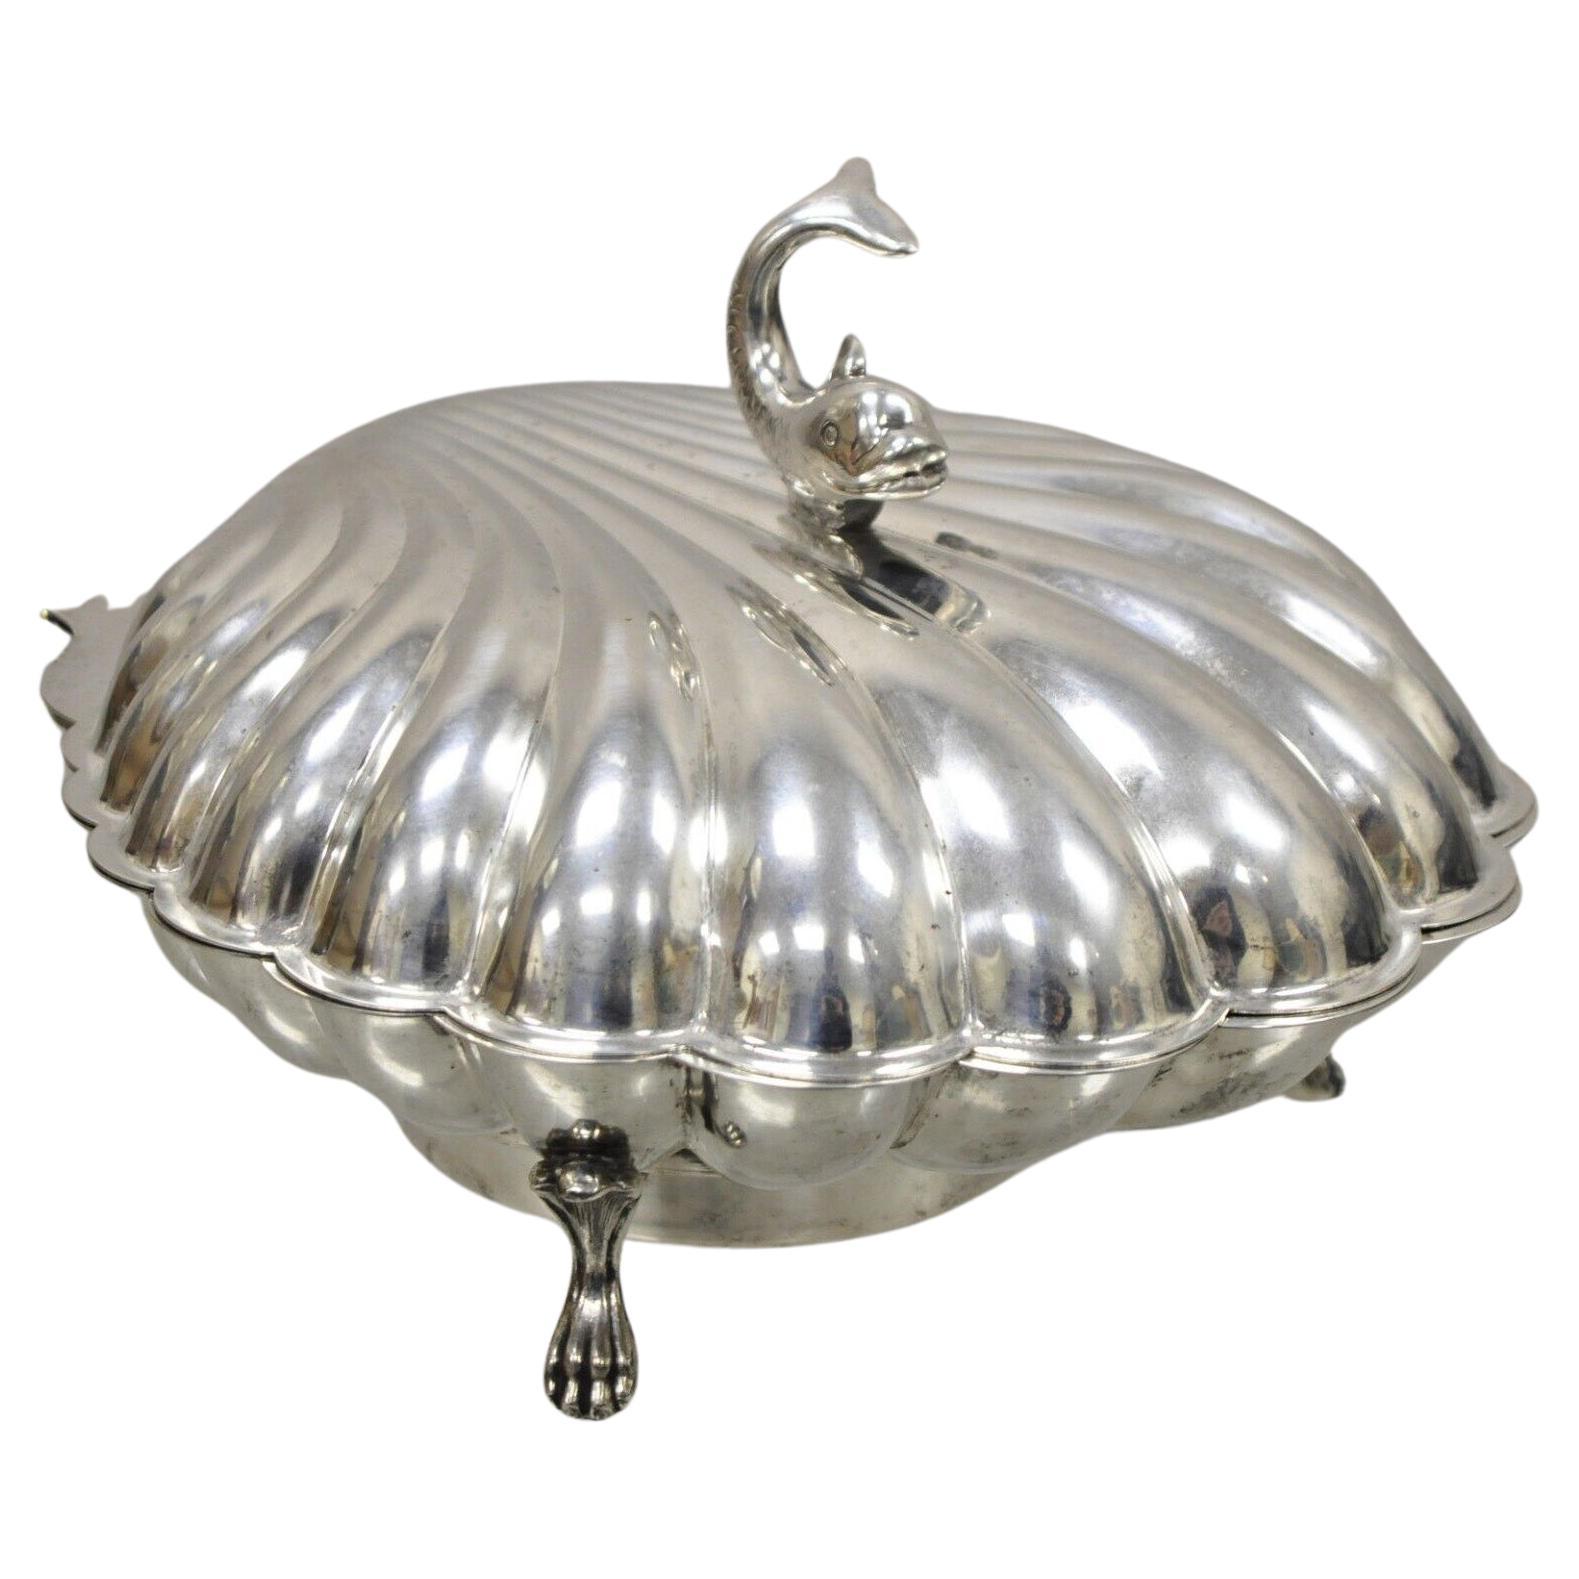 Vintage Eton Dolphin Handle Clam Shell Silver Plated Electrified Bun Warmer For Sale